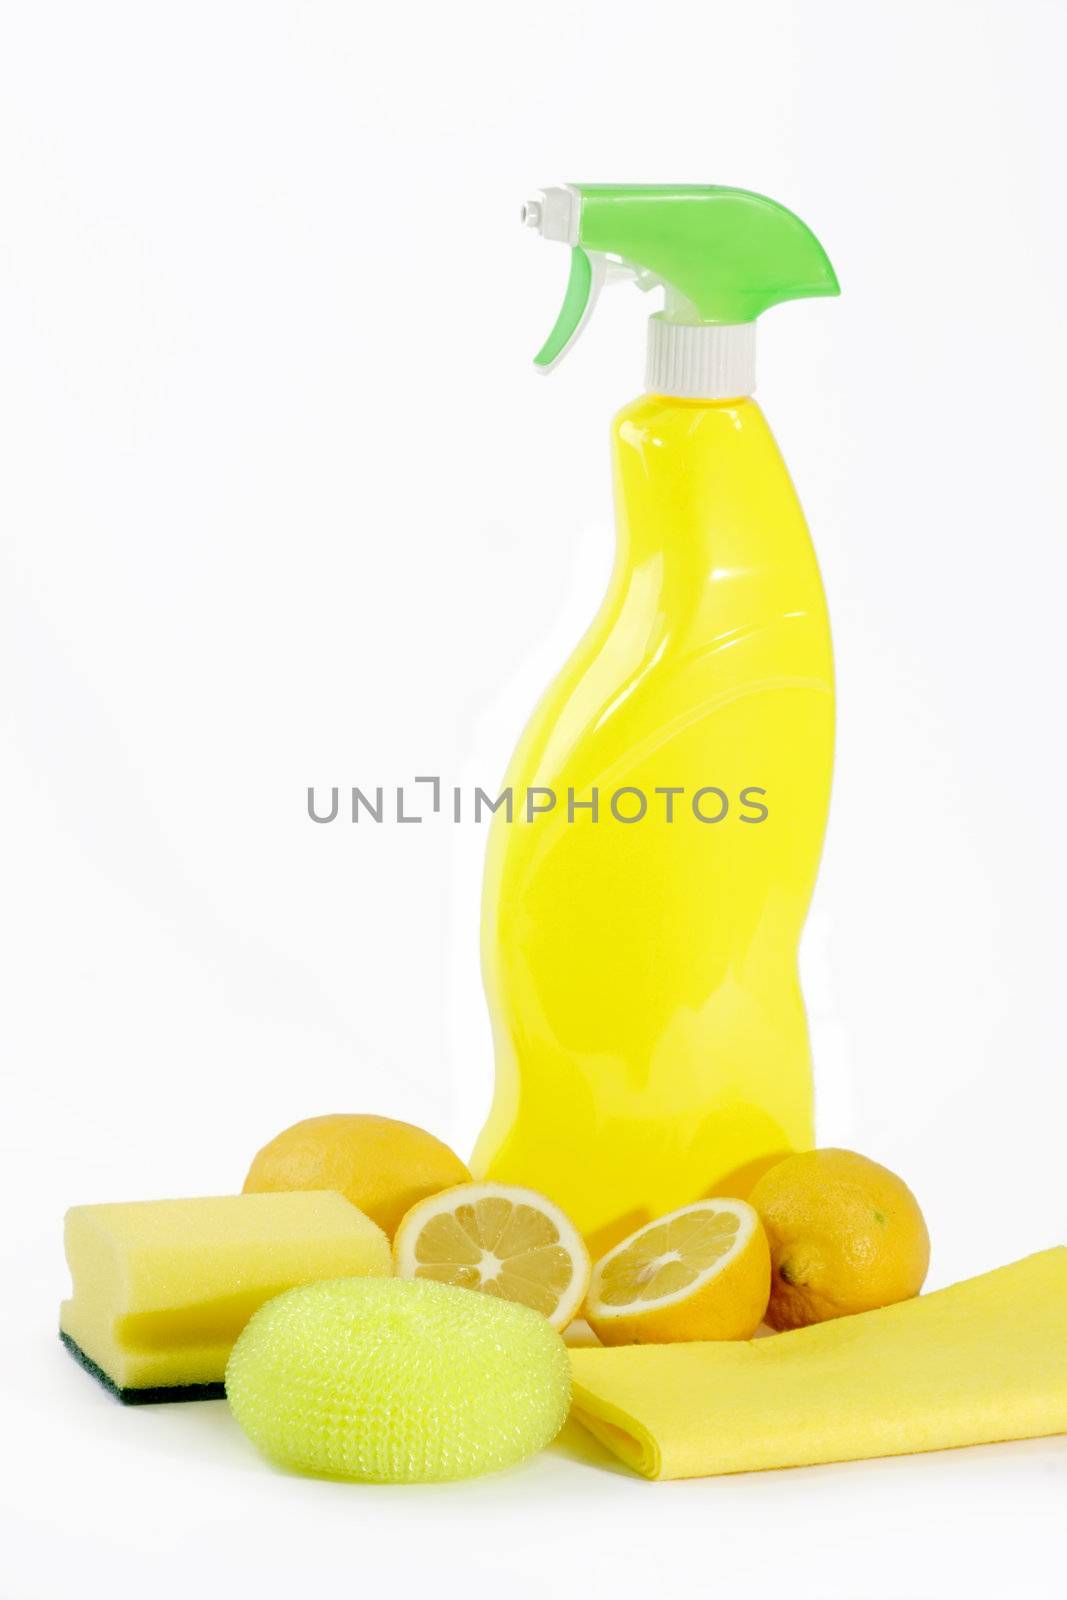 Yellow Lemon Cleaner by Teamarbeit